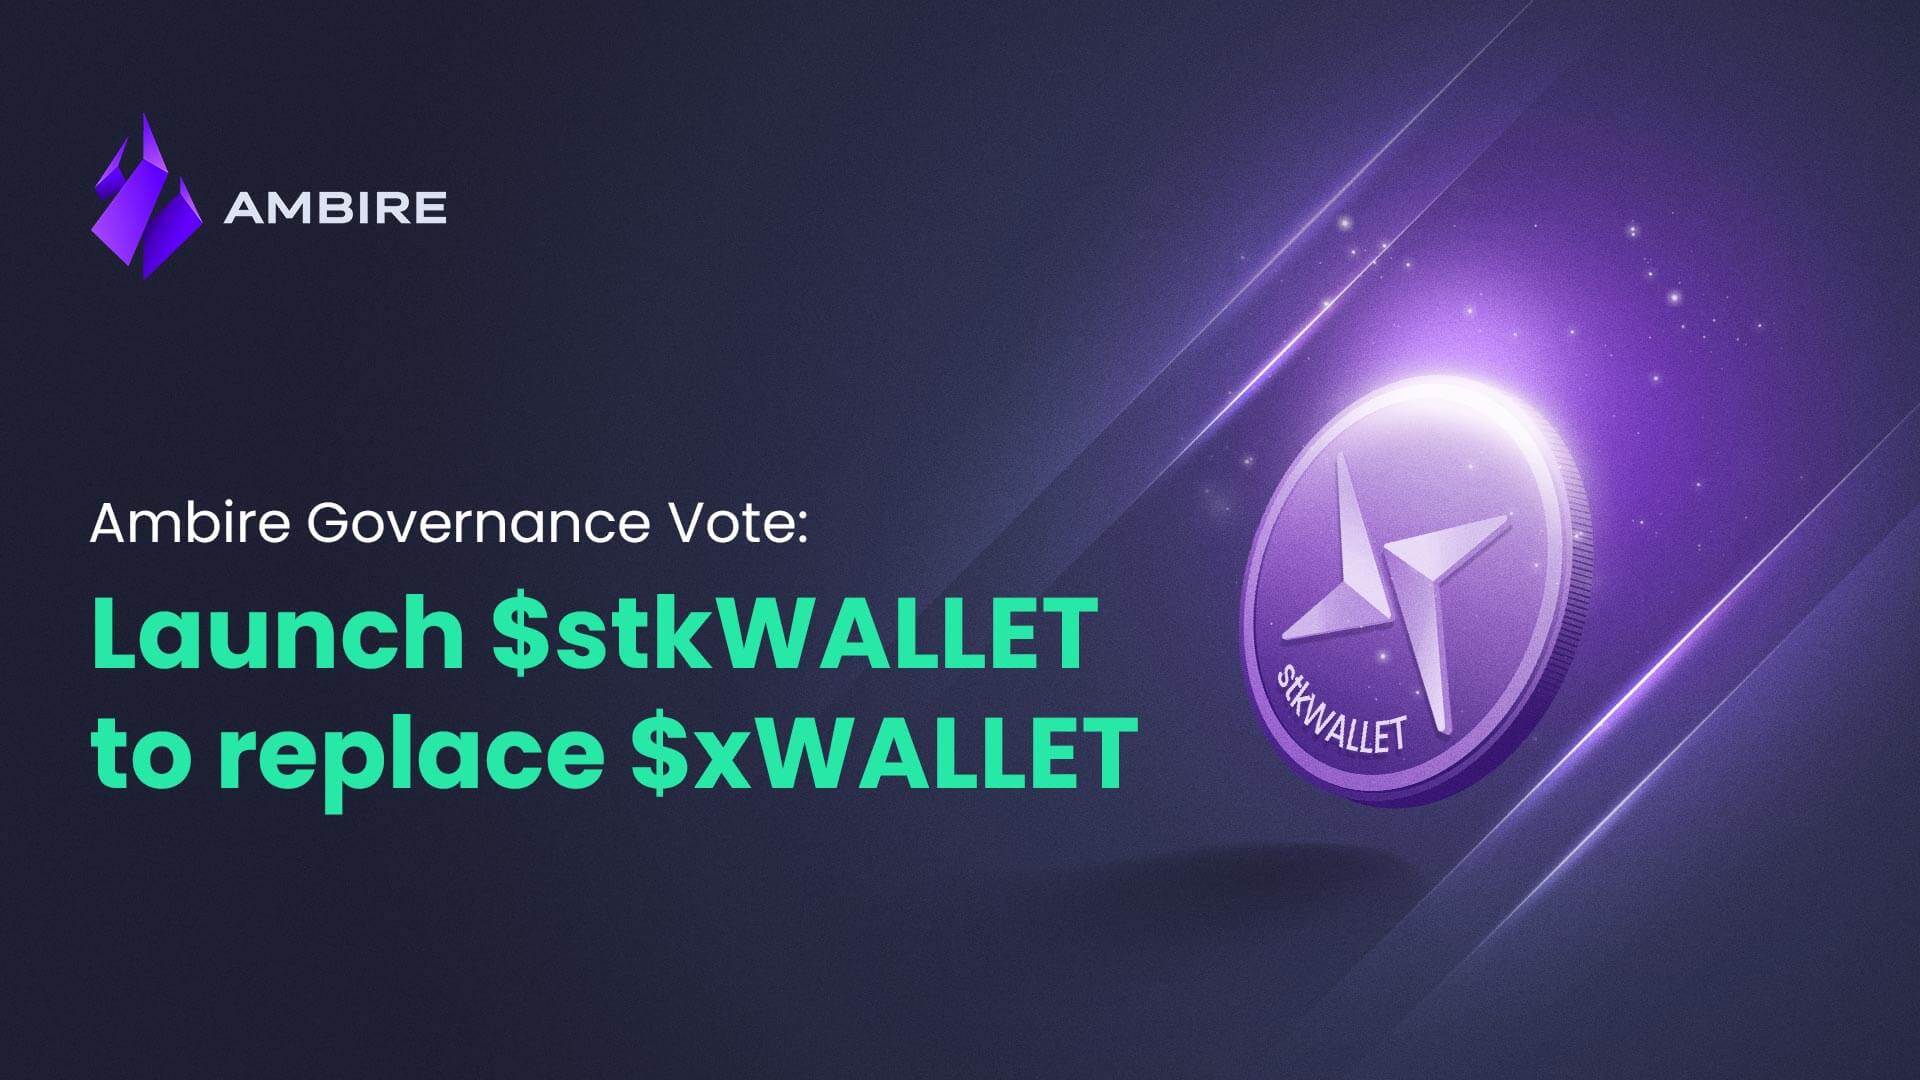 Launch $stkWALLET to replace $xWALLET